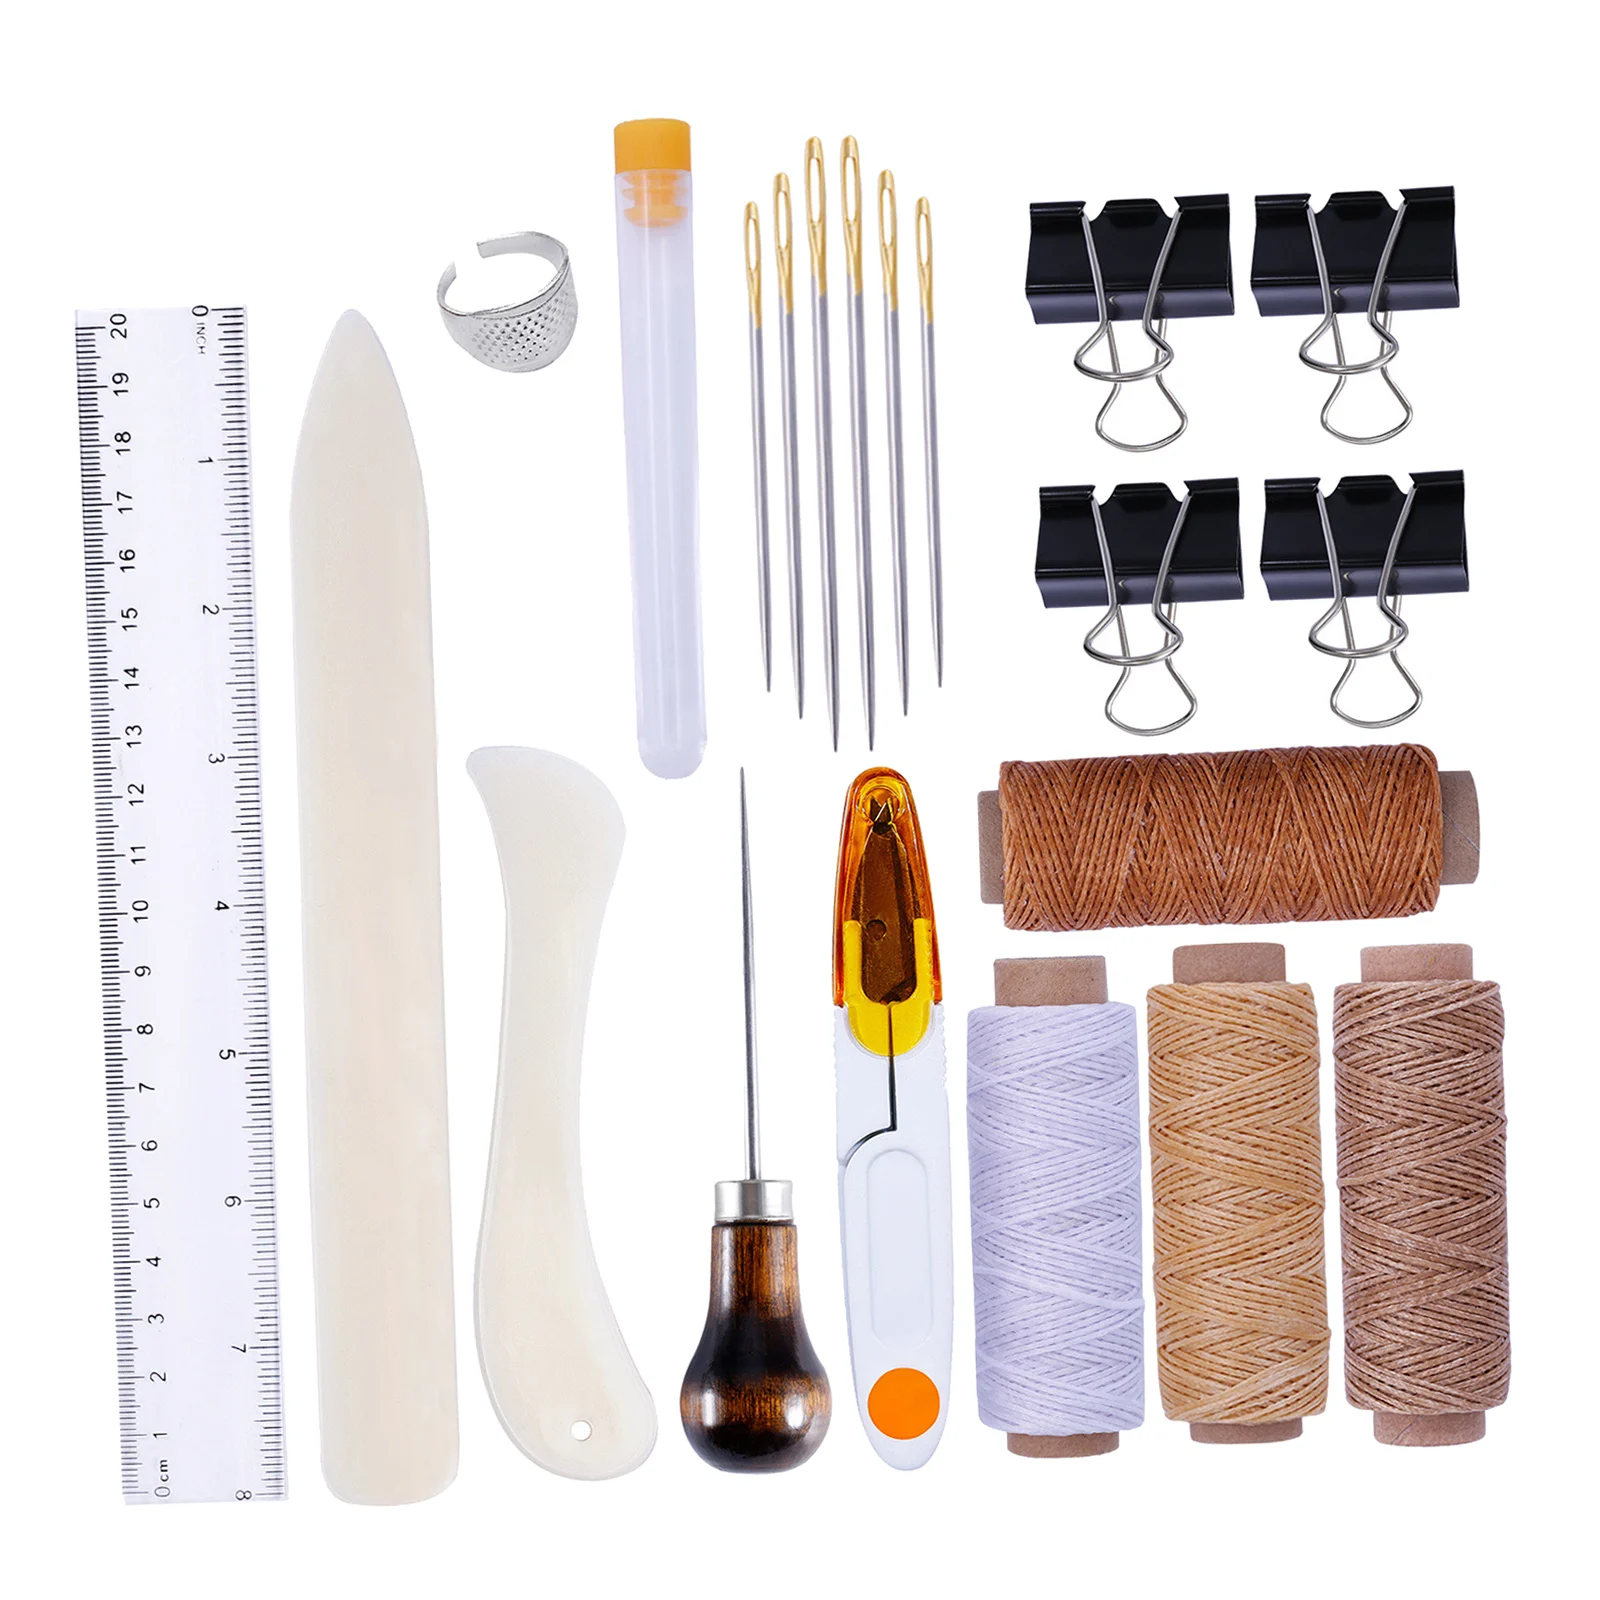 Leather Crafting Tools, Leather Craft Needles, Waxed Threads, Ruler, Awl, Thimble Set Hand Stitching Tool